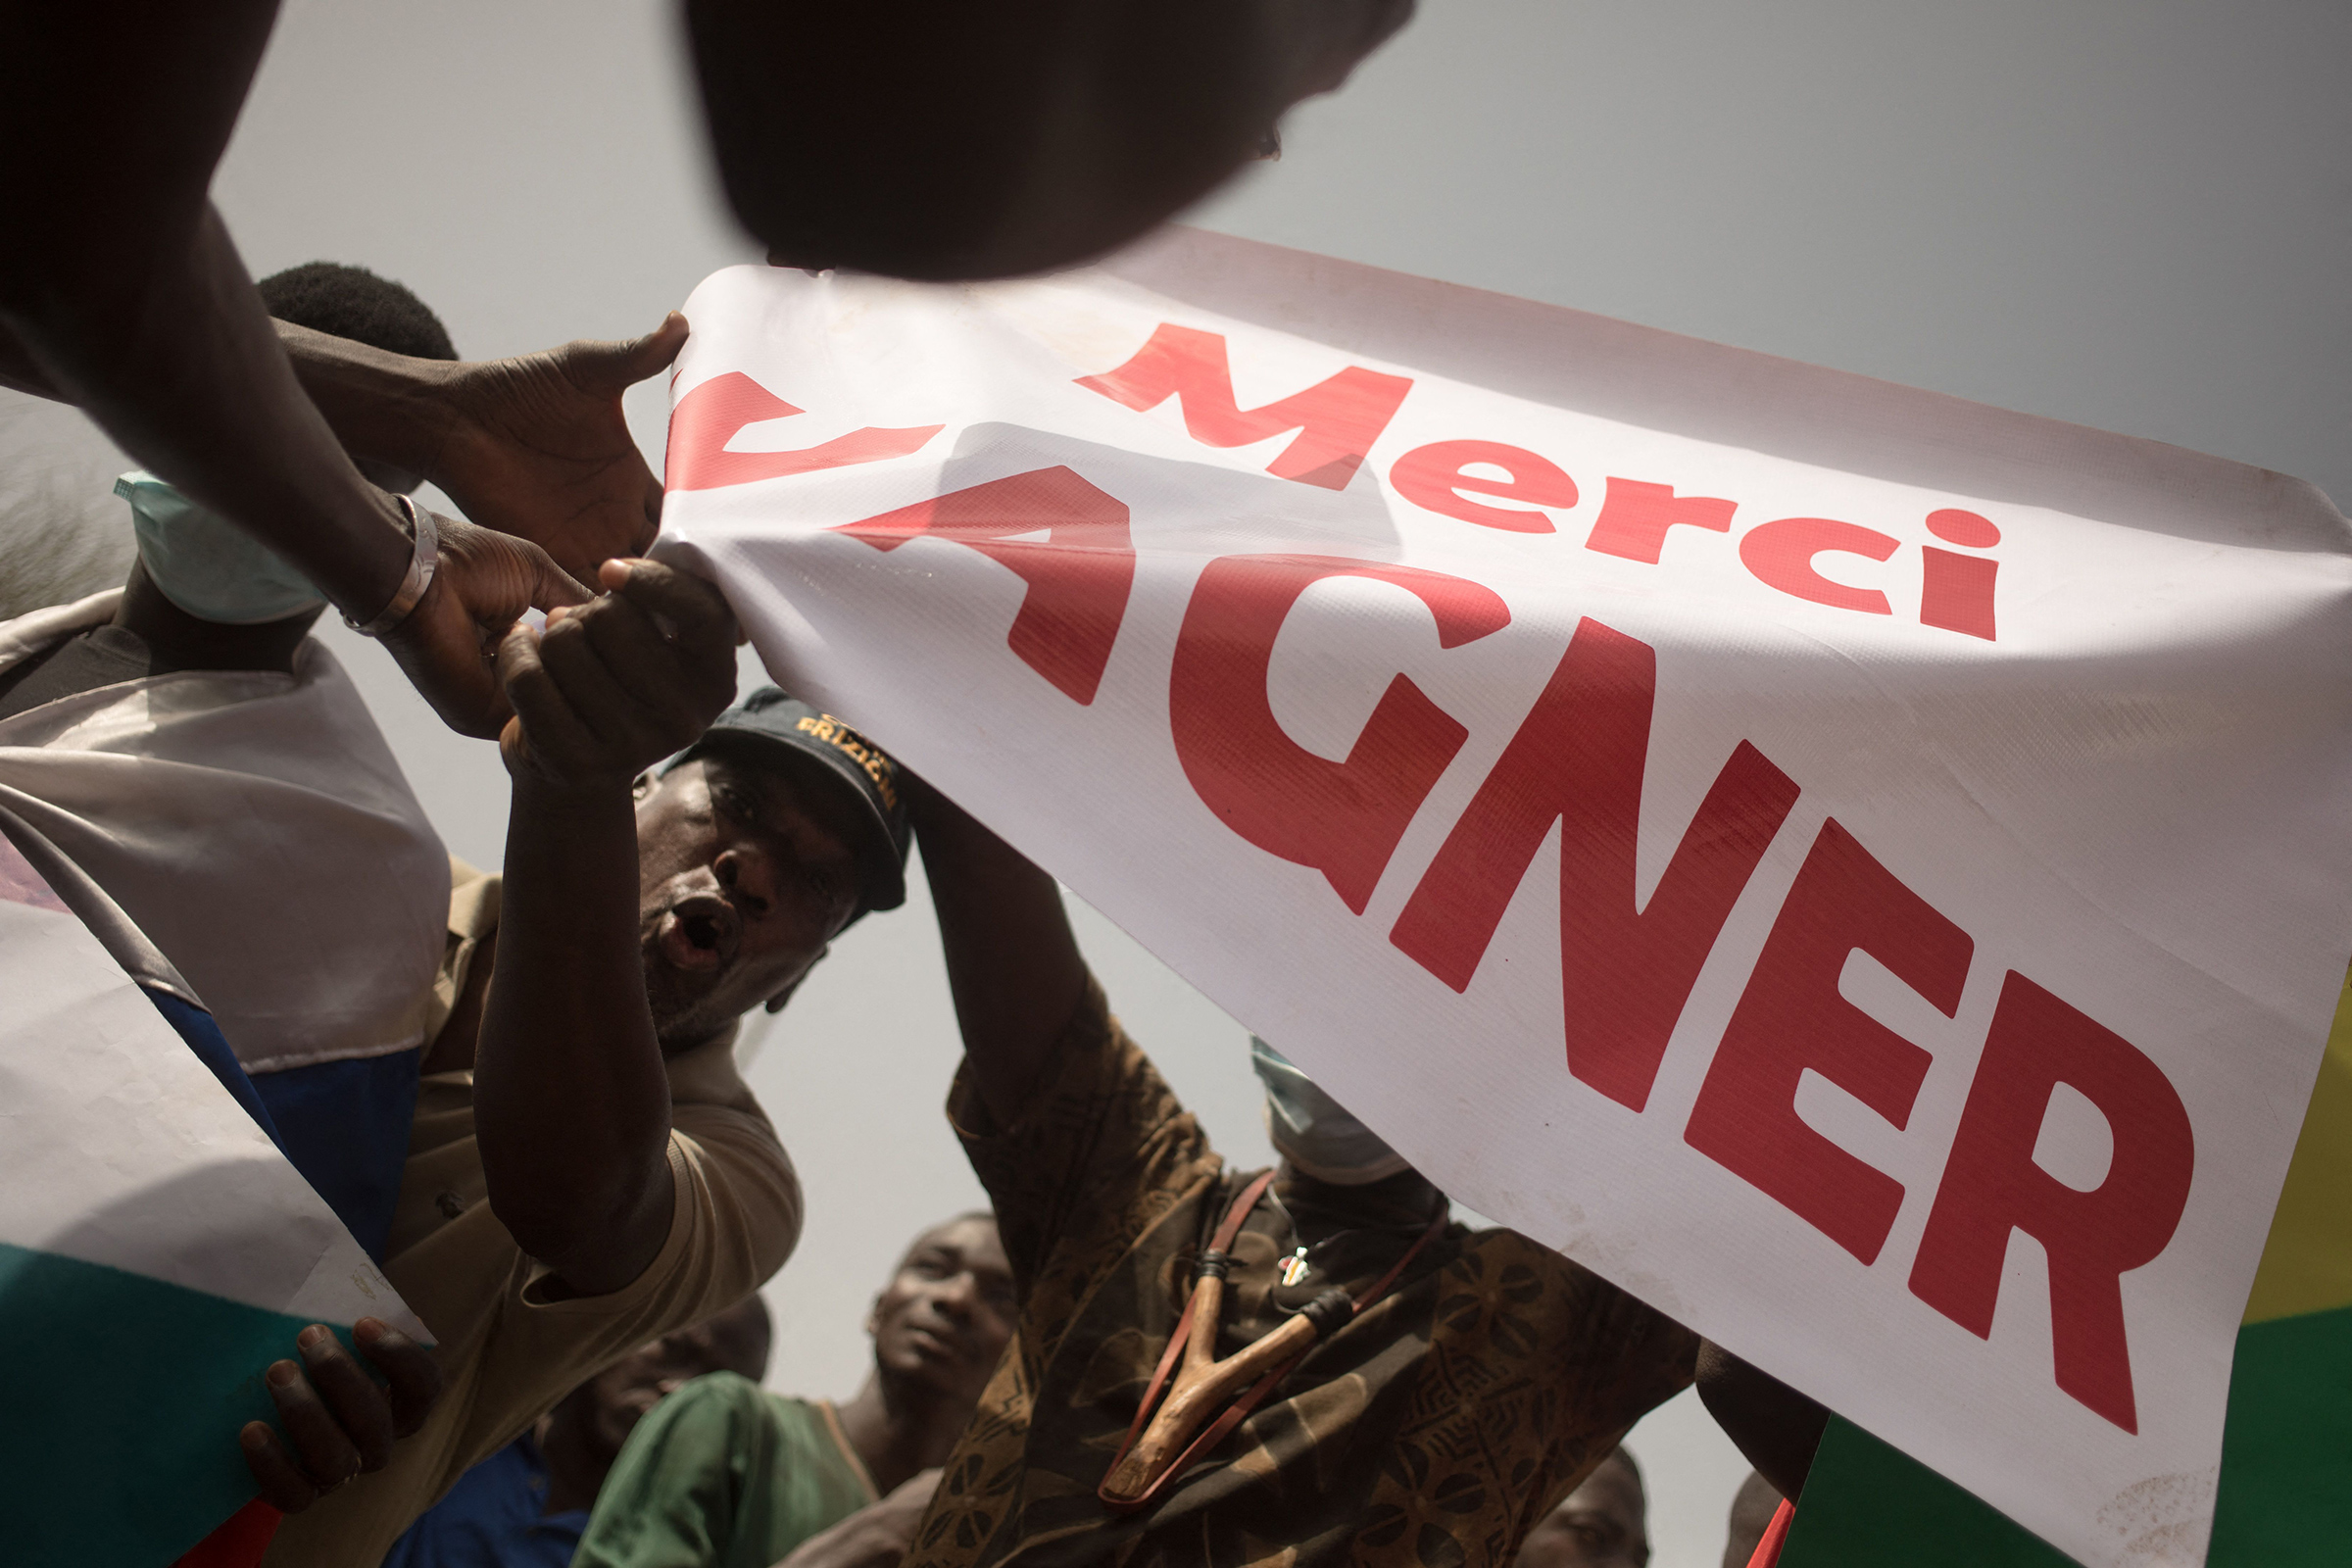 Protesters holds a banner reading "Thank you Wagner", the name of the Russian private security firm present in Mali, during a demonstration organized by the pan-Africanst platform Yerewolo to celebrate France's announcement to withdraw French troops from Mali, in Bamako, Mali, on Feb. 19, 2022.